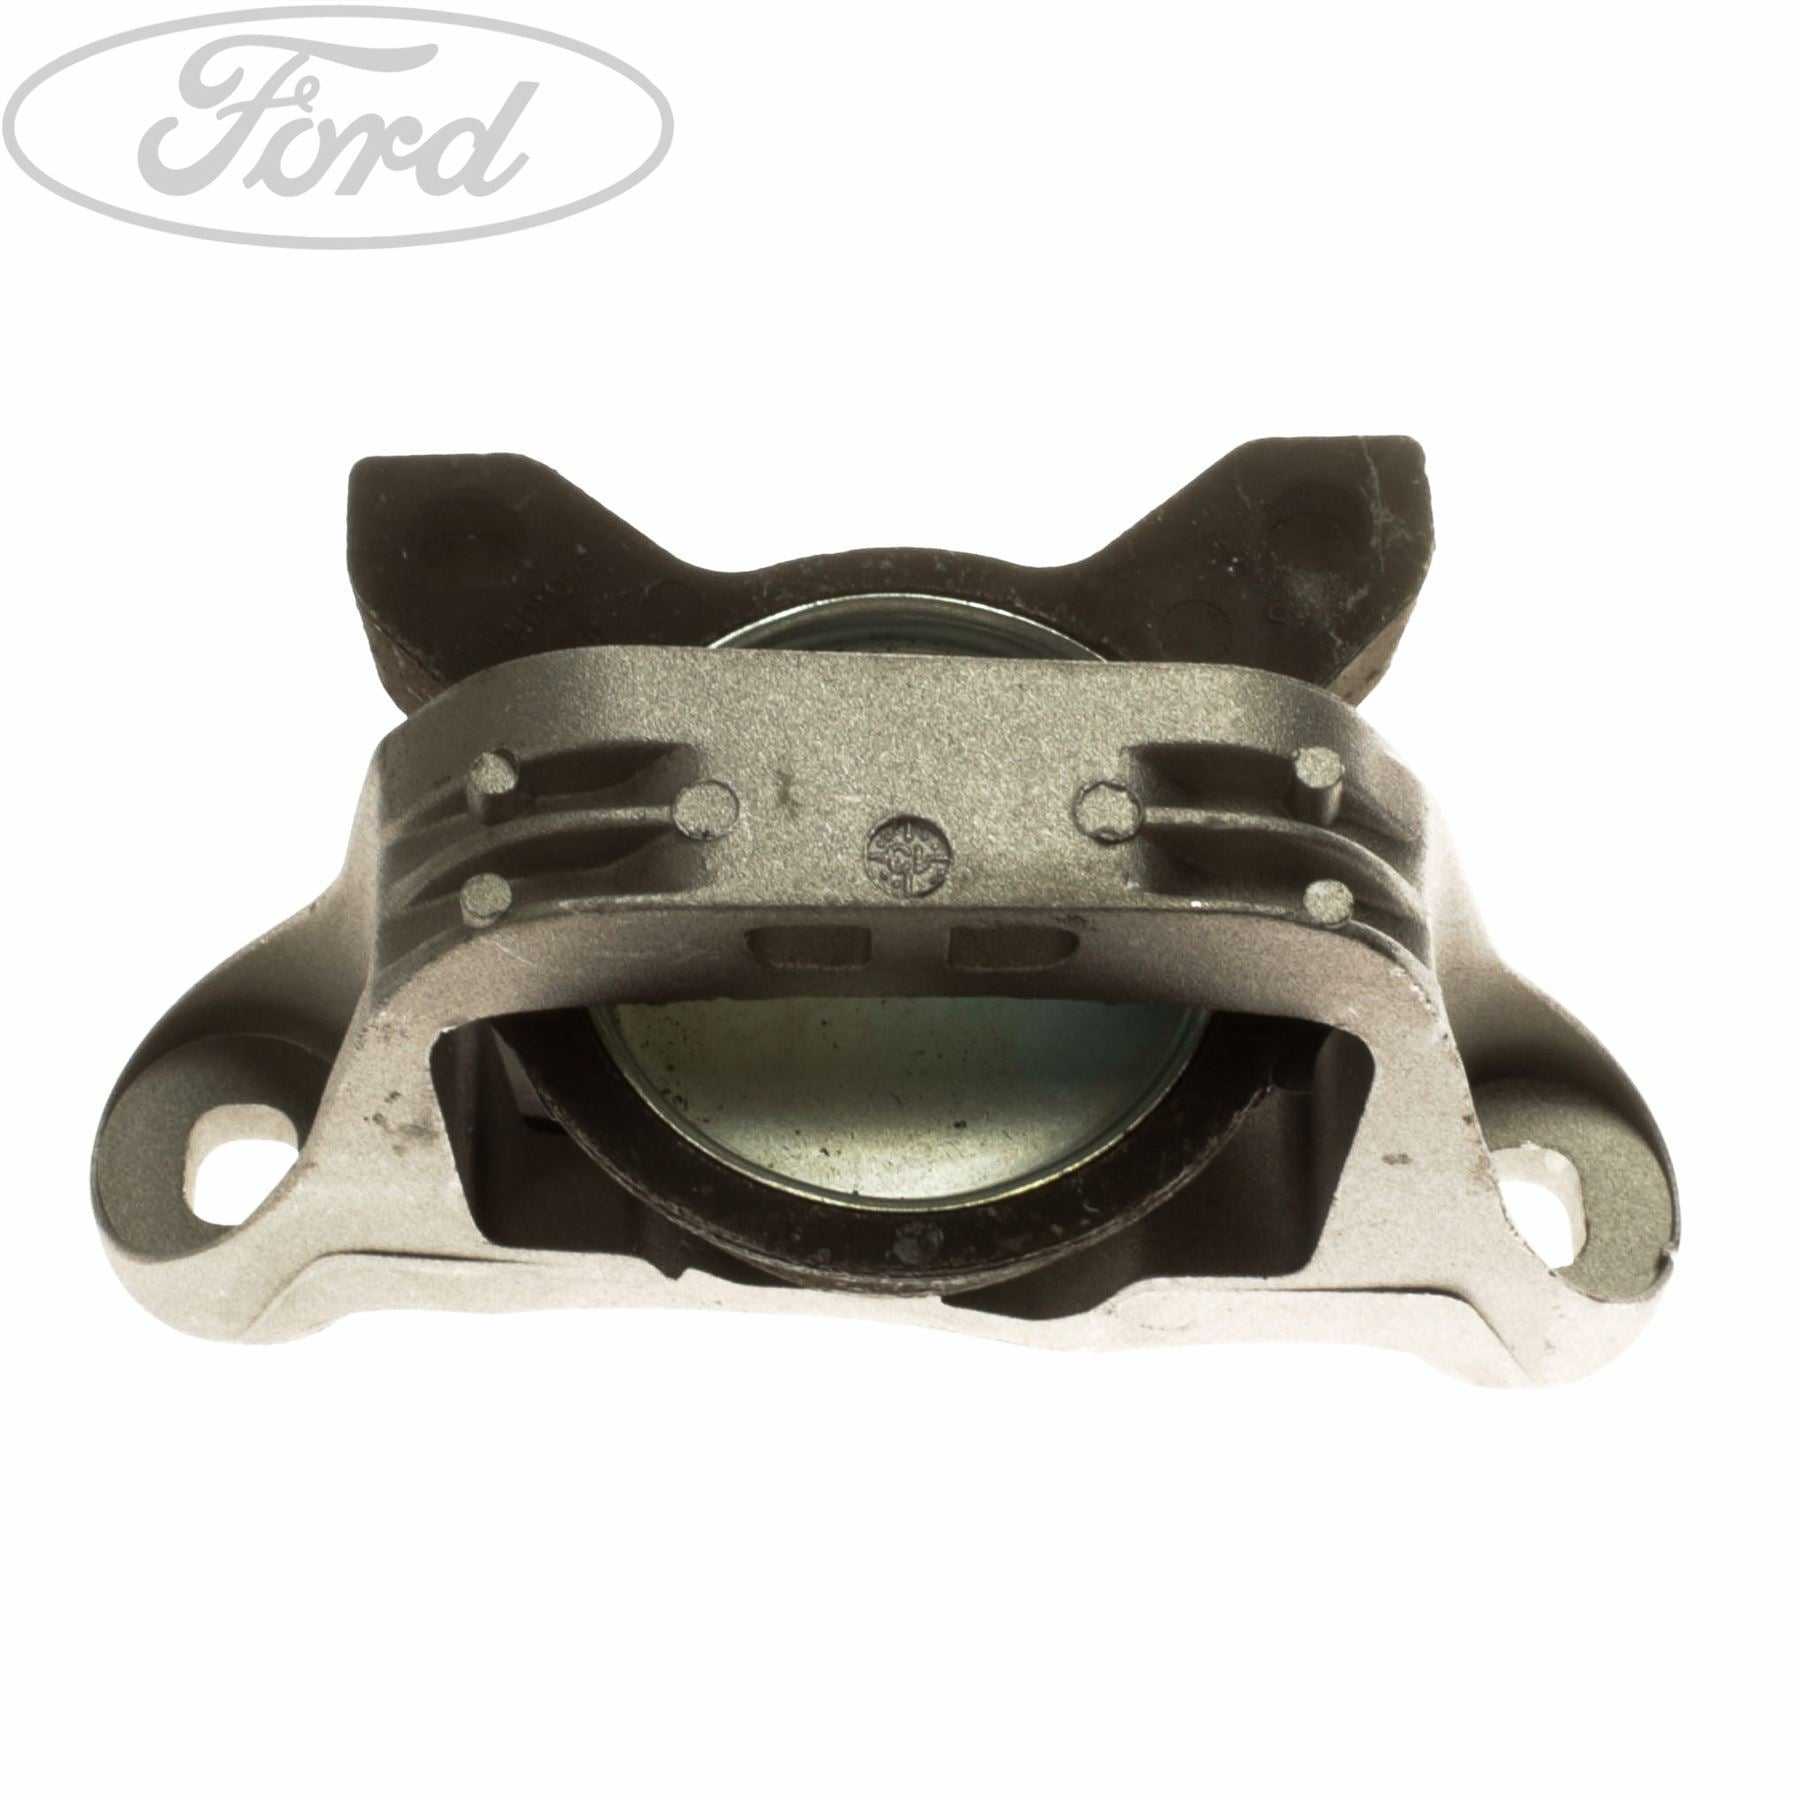 Ford, TRANSIT CONNECT FRONT ENGINE MOUNT SUPPORT BRACKET 02-13